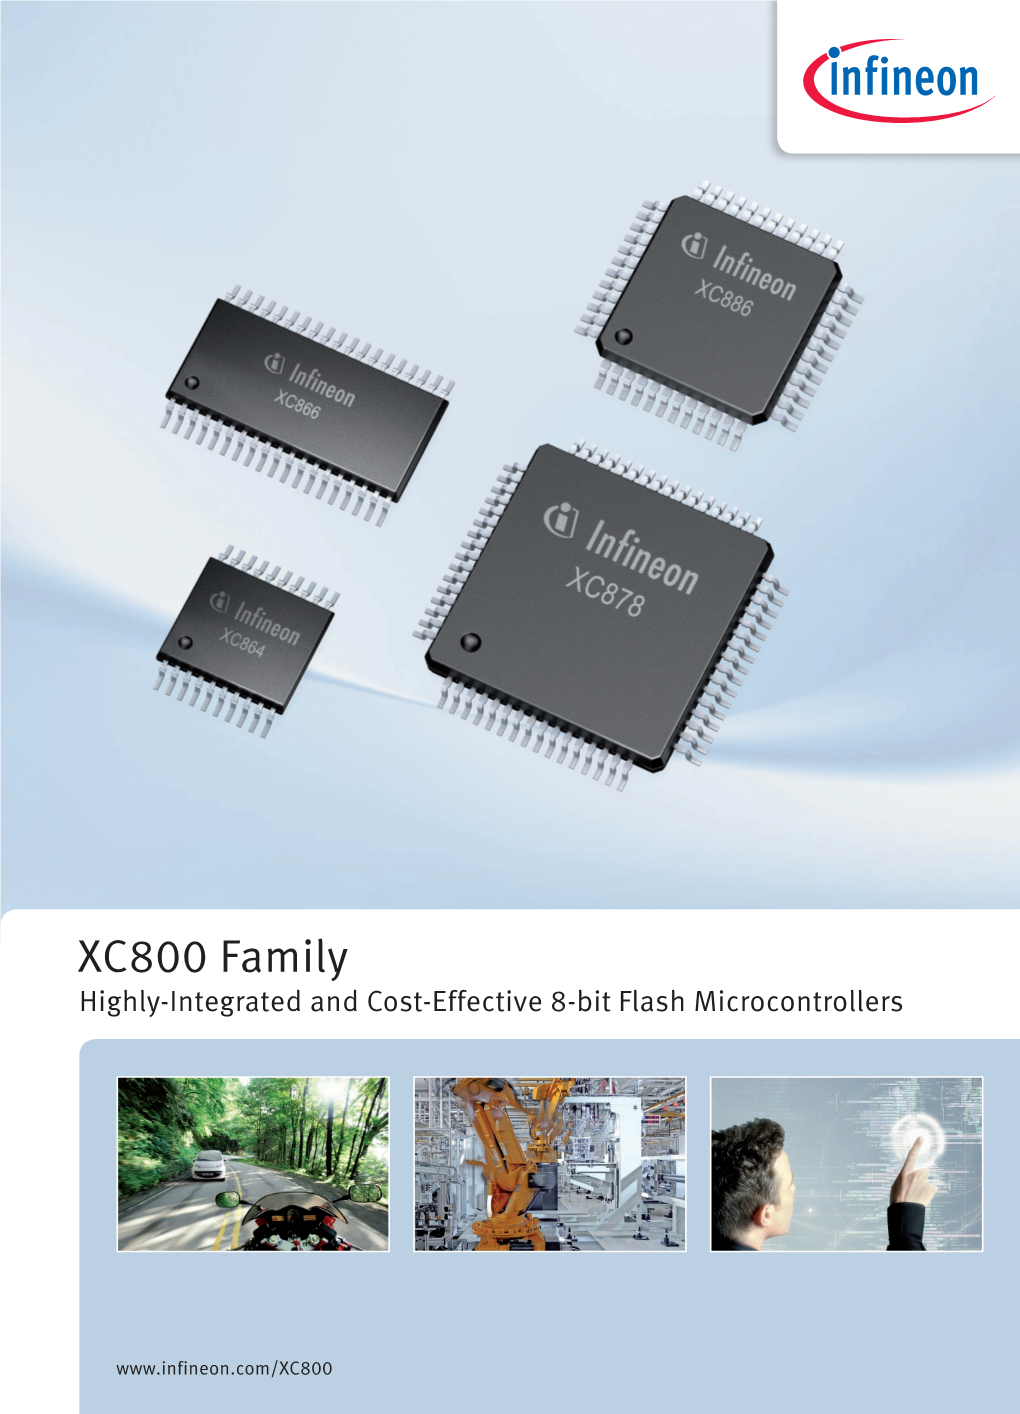 XC800 Family Highly-Integrated and Cost-Effective 8-Bit Flash Microcontrollers